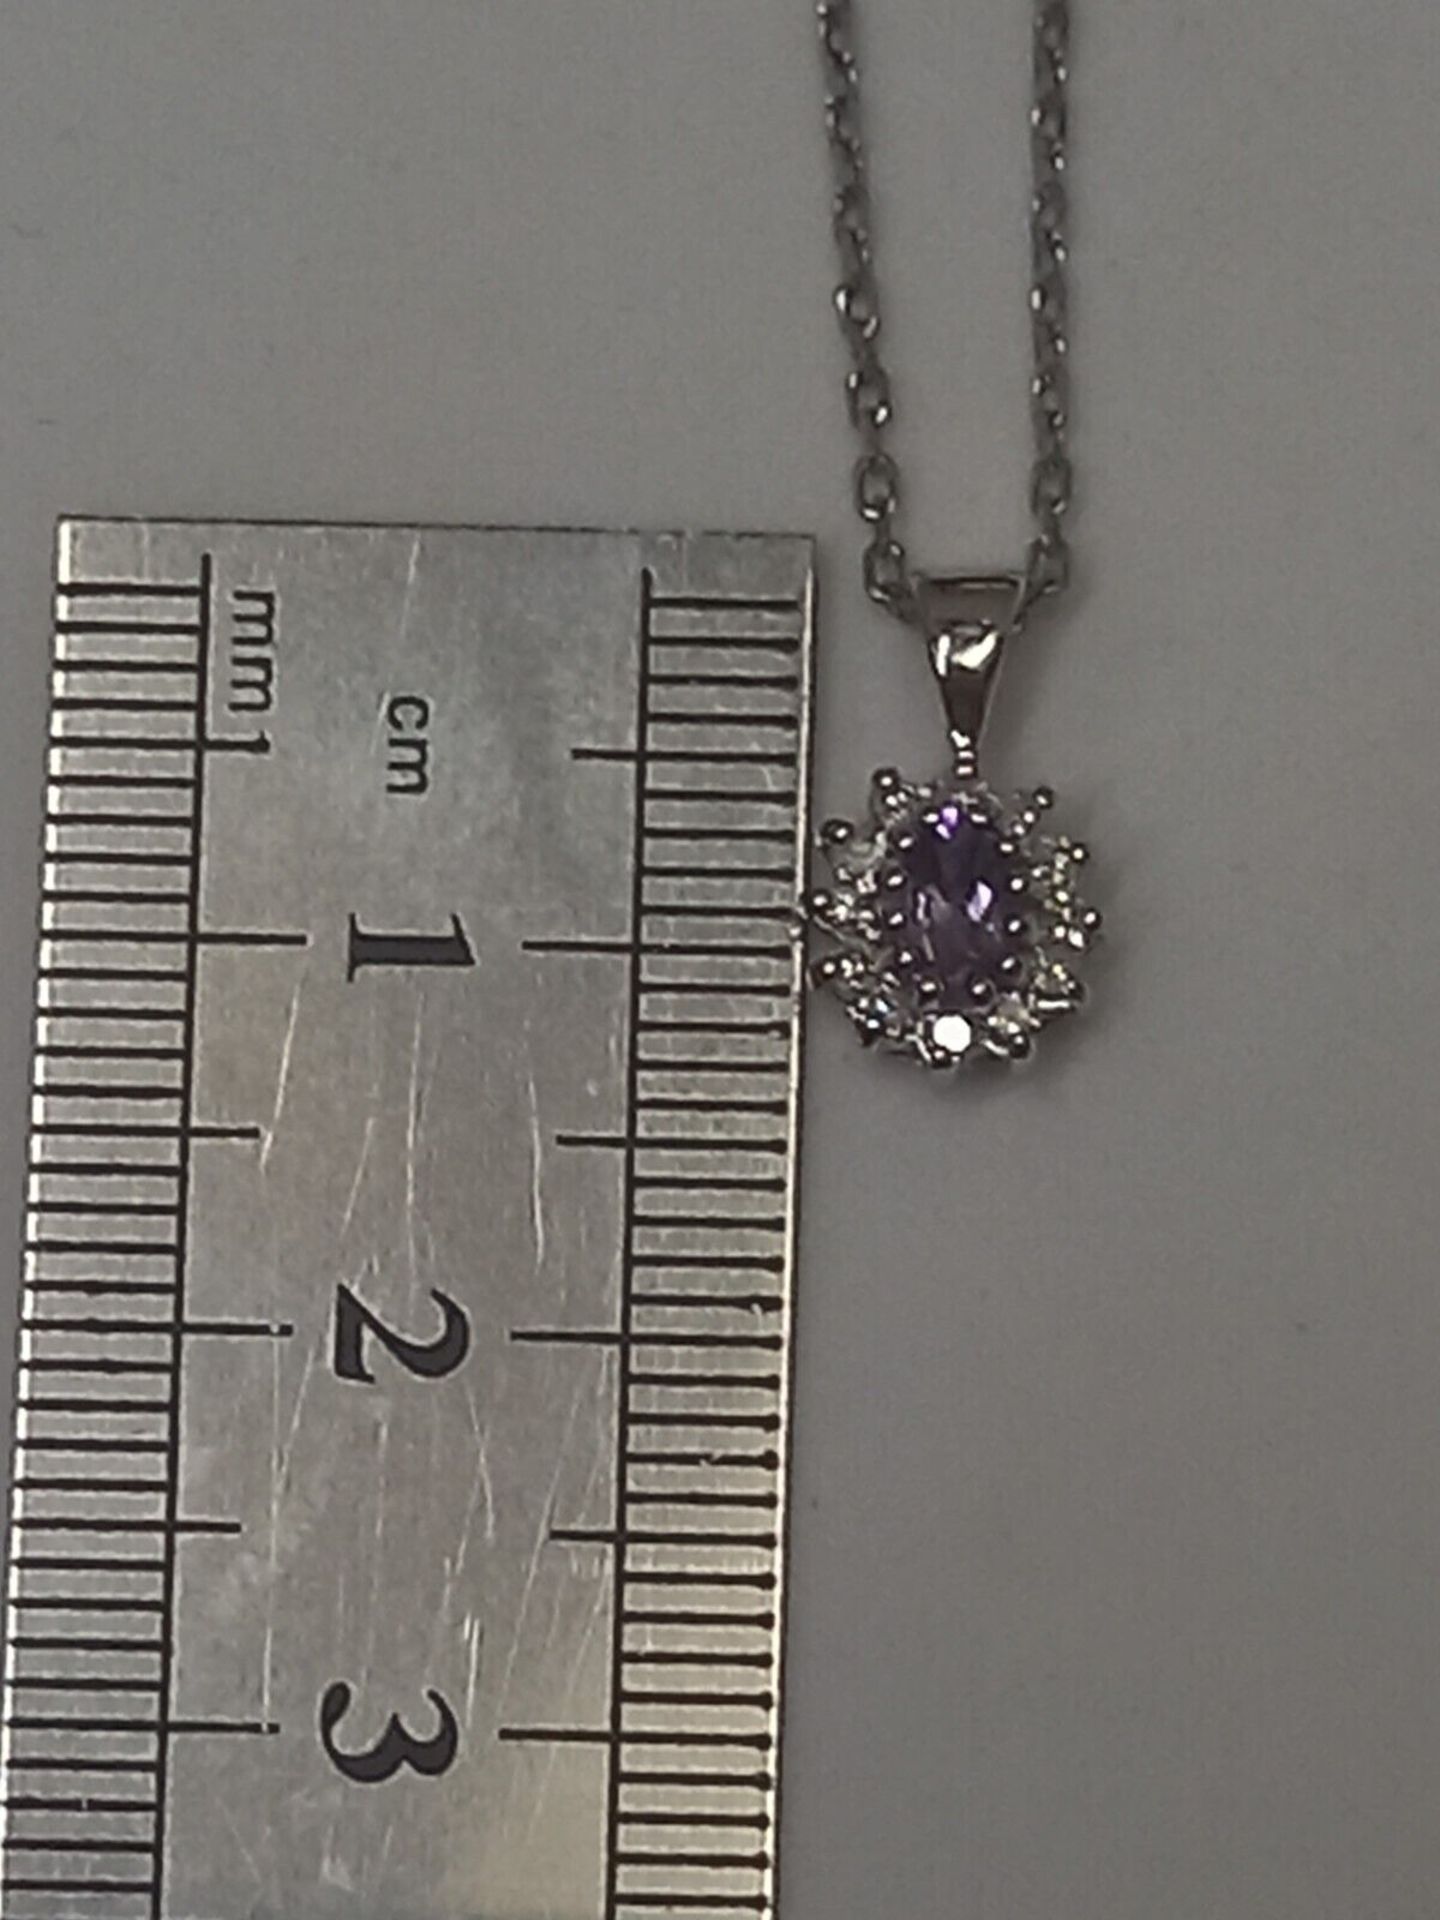 0.12CT DIAMOND & AMYTHIST PENDANT 9CT WHITE GOLD IN GIFT BOX + VALUATION CERTIFICATE OF £795 - Image 4 of 4